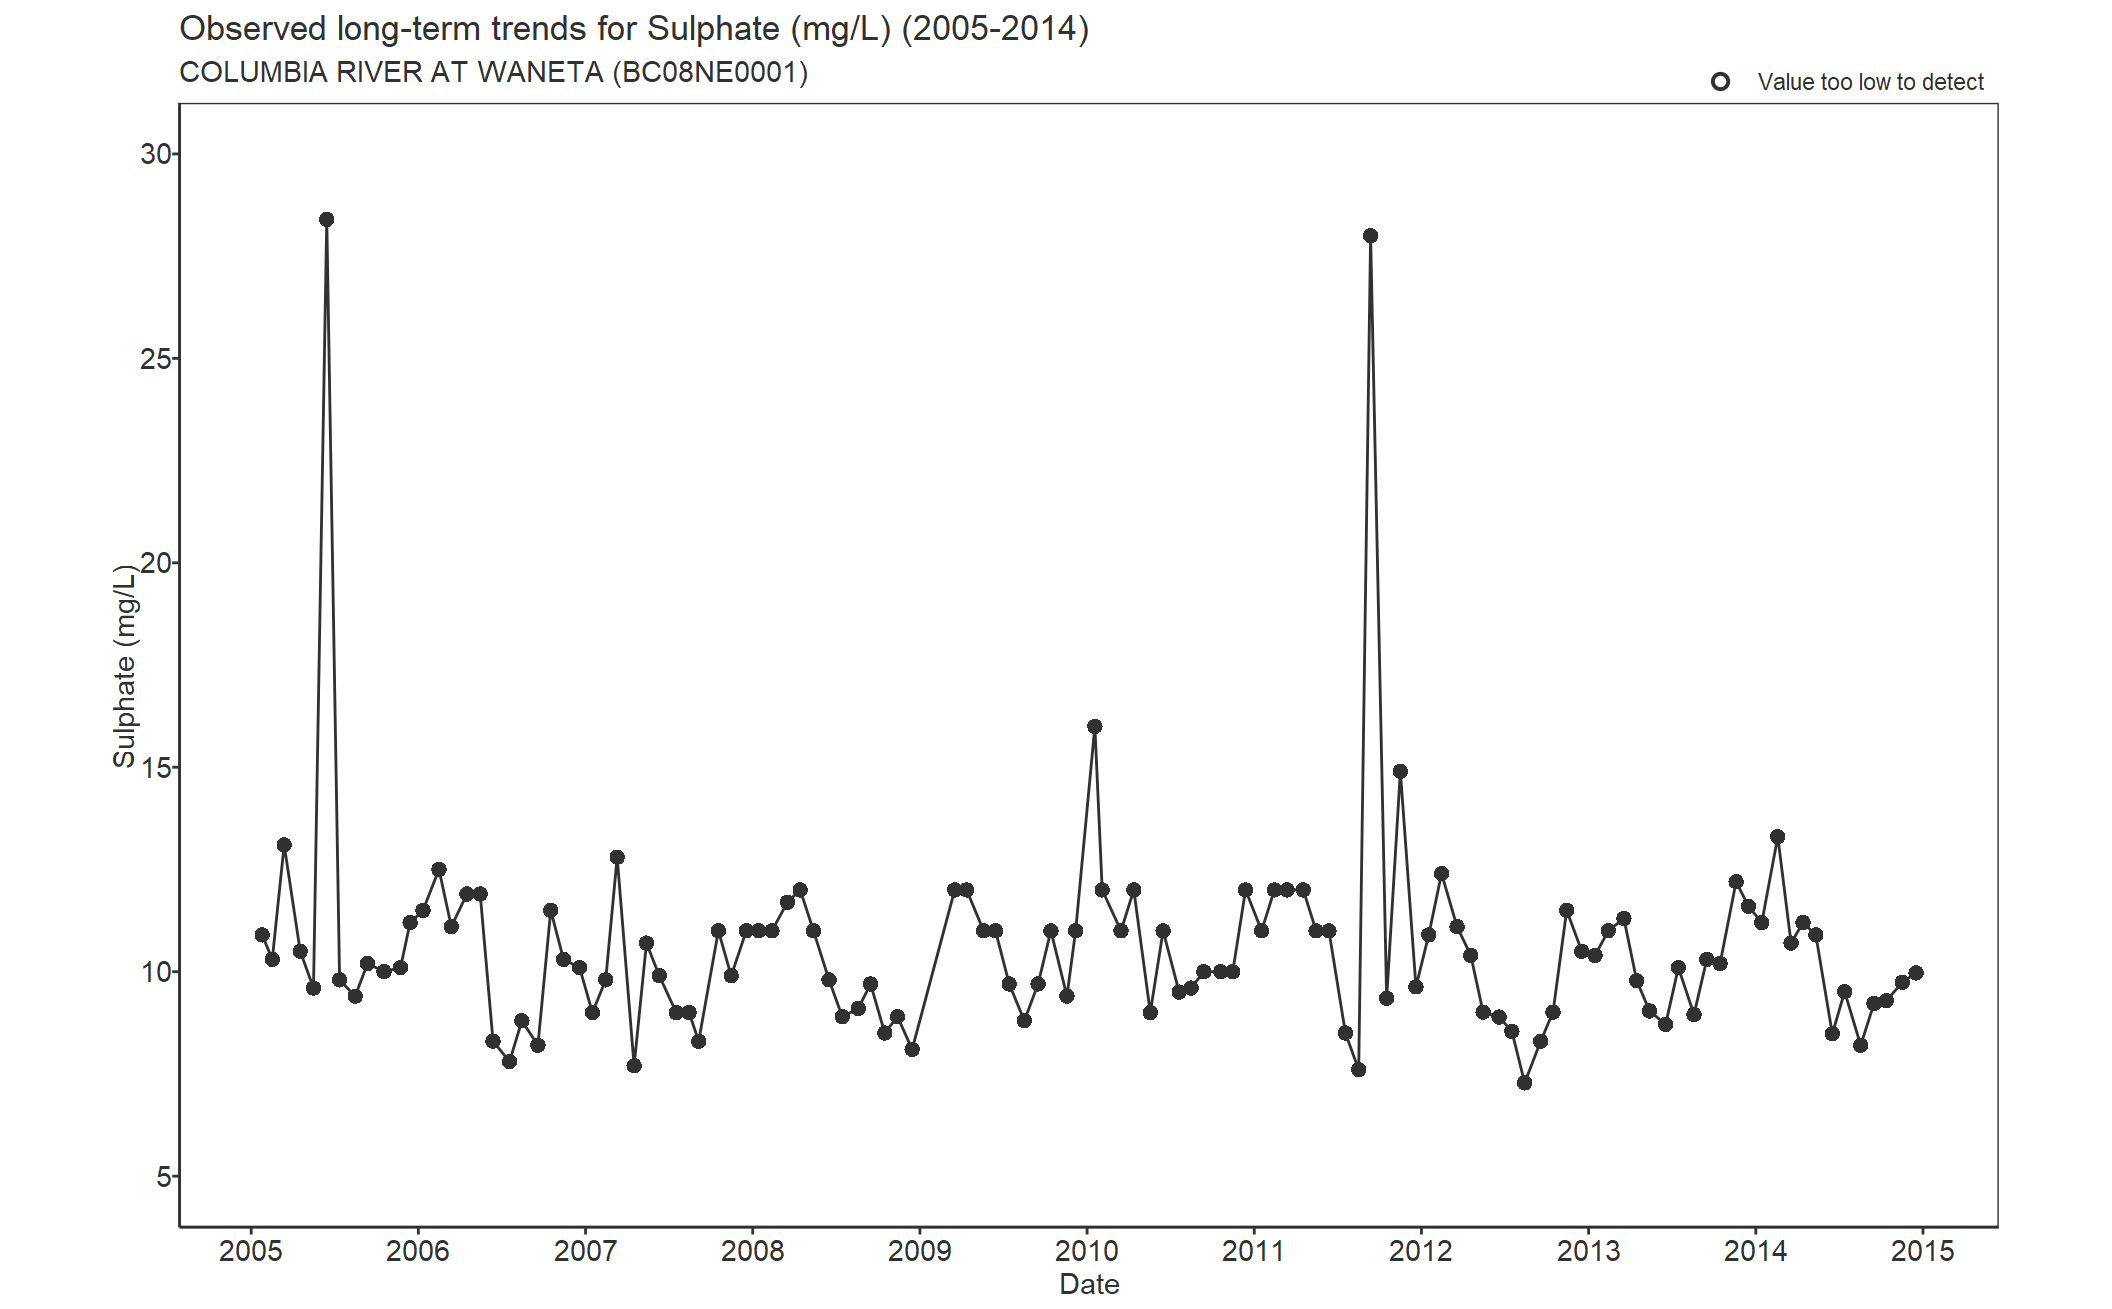 Observed long-term trends for Sulphate (2005-2014)